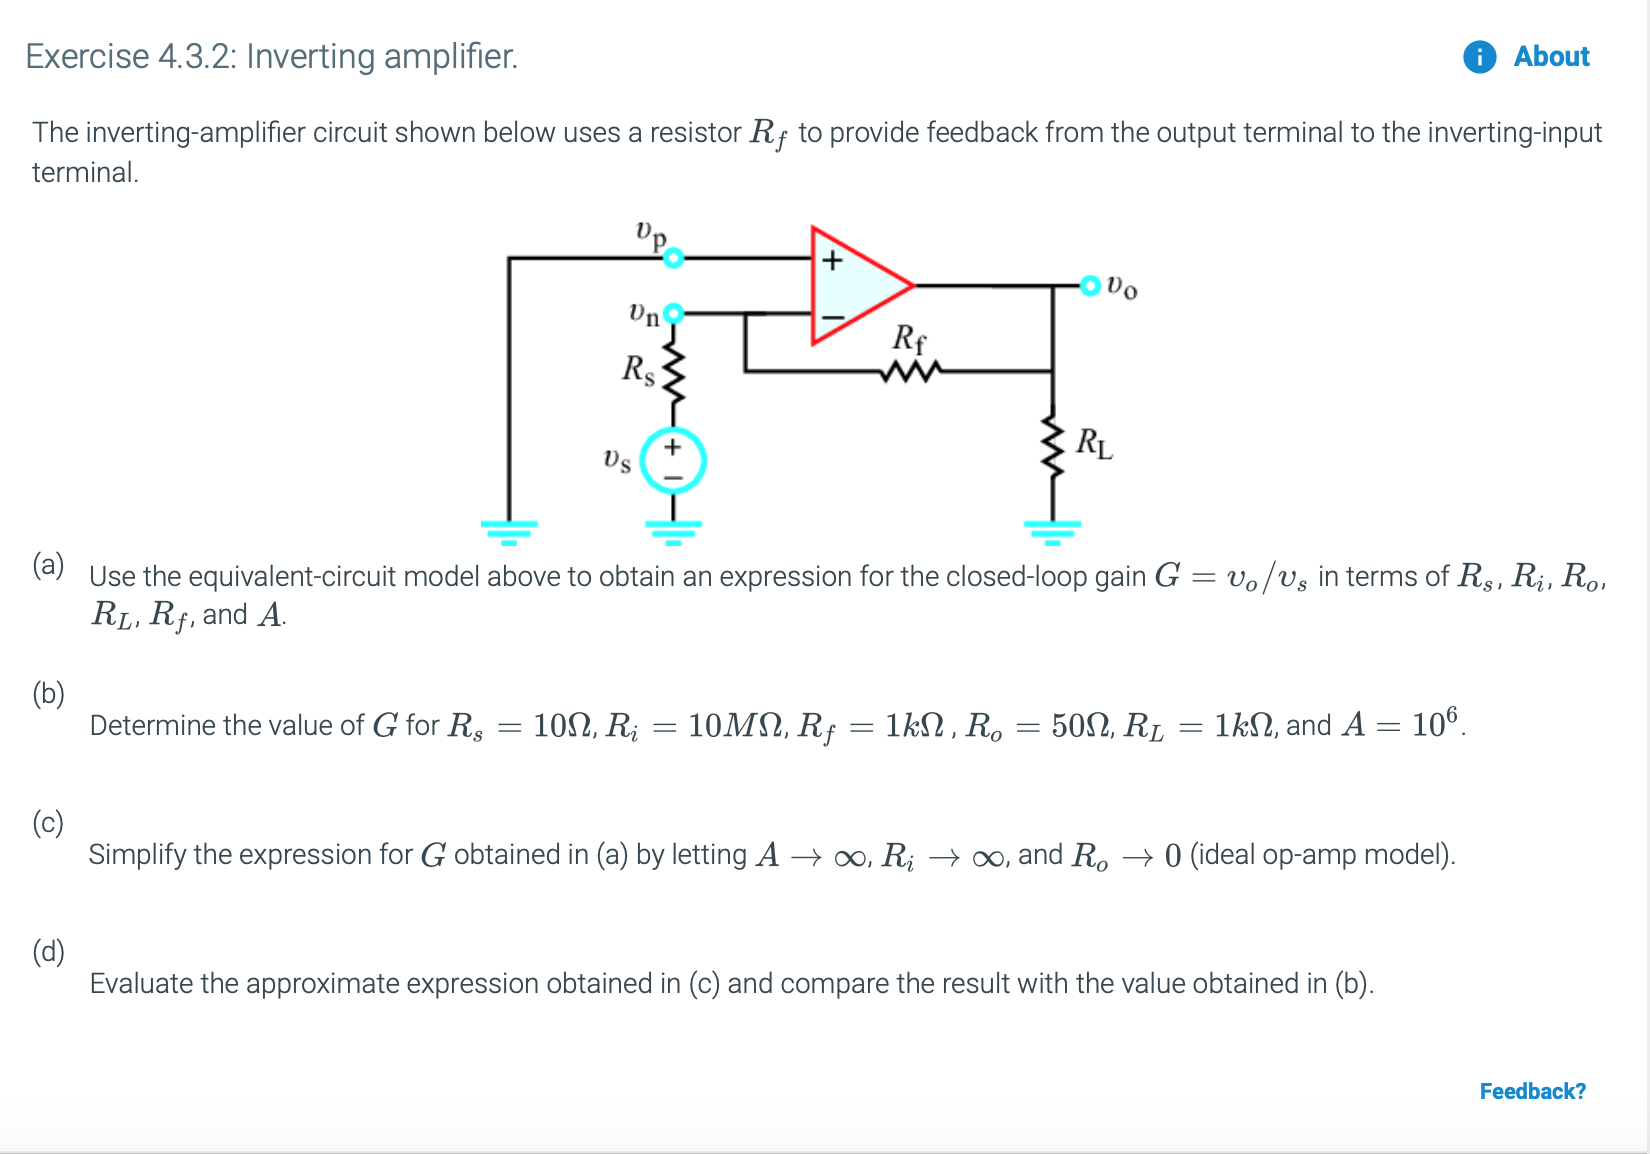 Exercise 4.3.2: Inverting amplifier.
About
The inverting-amplifier circuit shown below uses a resistor Rf to provide feedback from the output terminal to the inverting-input
terminal
'p
Rs
+
(aUse the equivalent-circuit model above to obtain an expression for the closed-loop gain G
RLI Rf, and A
vo/vs in terms of R, Ri, Roi
(b)
Determine the value of G for R
106
10MΩ Rf1kΩ, R,50Ω, R,
10Ω, R
1k, and A
(c)
Simplify the expression for G obtained in (a) by letting A oo, Ri >oo, and Ro --> 0 (ideal op-amp model)
(d)
Evaluate the approximate expression obtained in (c) and compare the result with the value obtained in (b)
Feedback?
